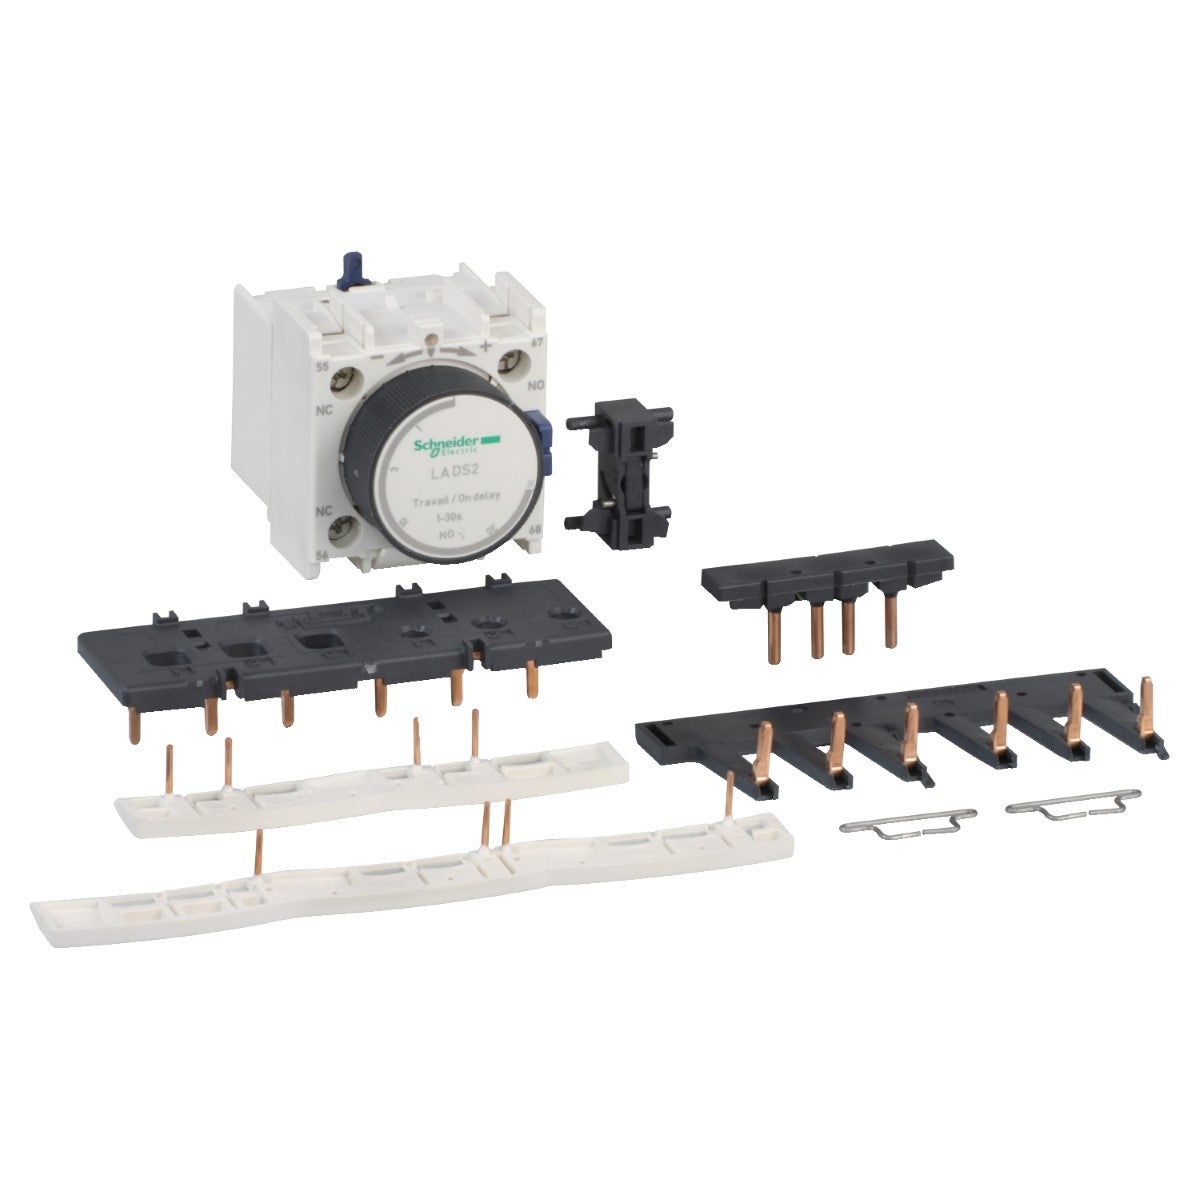 Kit for star delta starter assembling, for 3 x contactors LC1D09-D38 star identical, with timer block